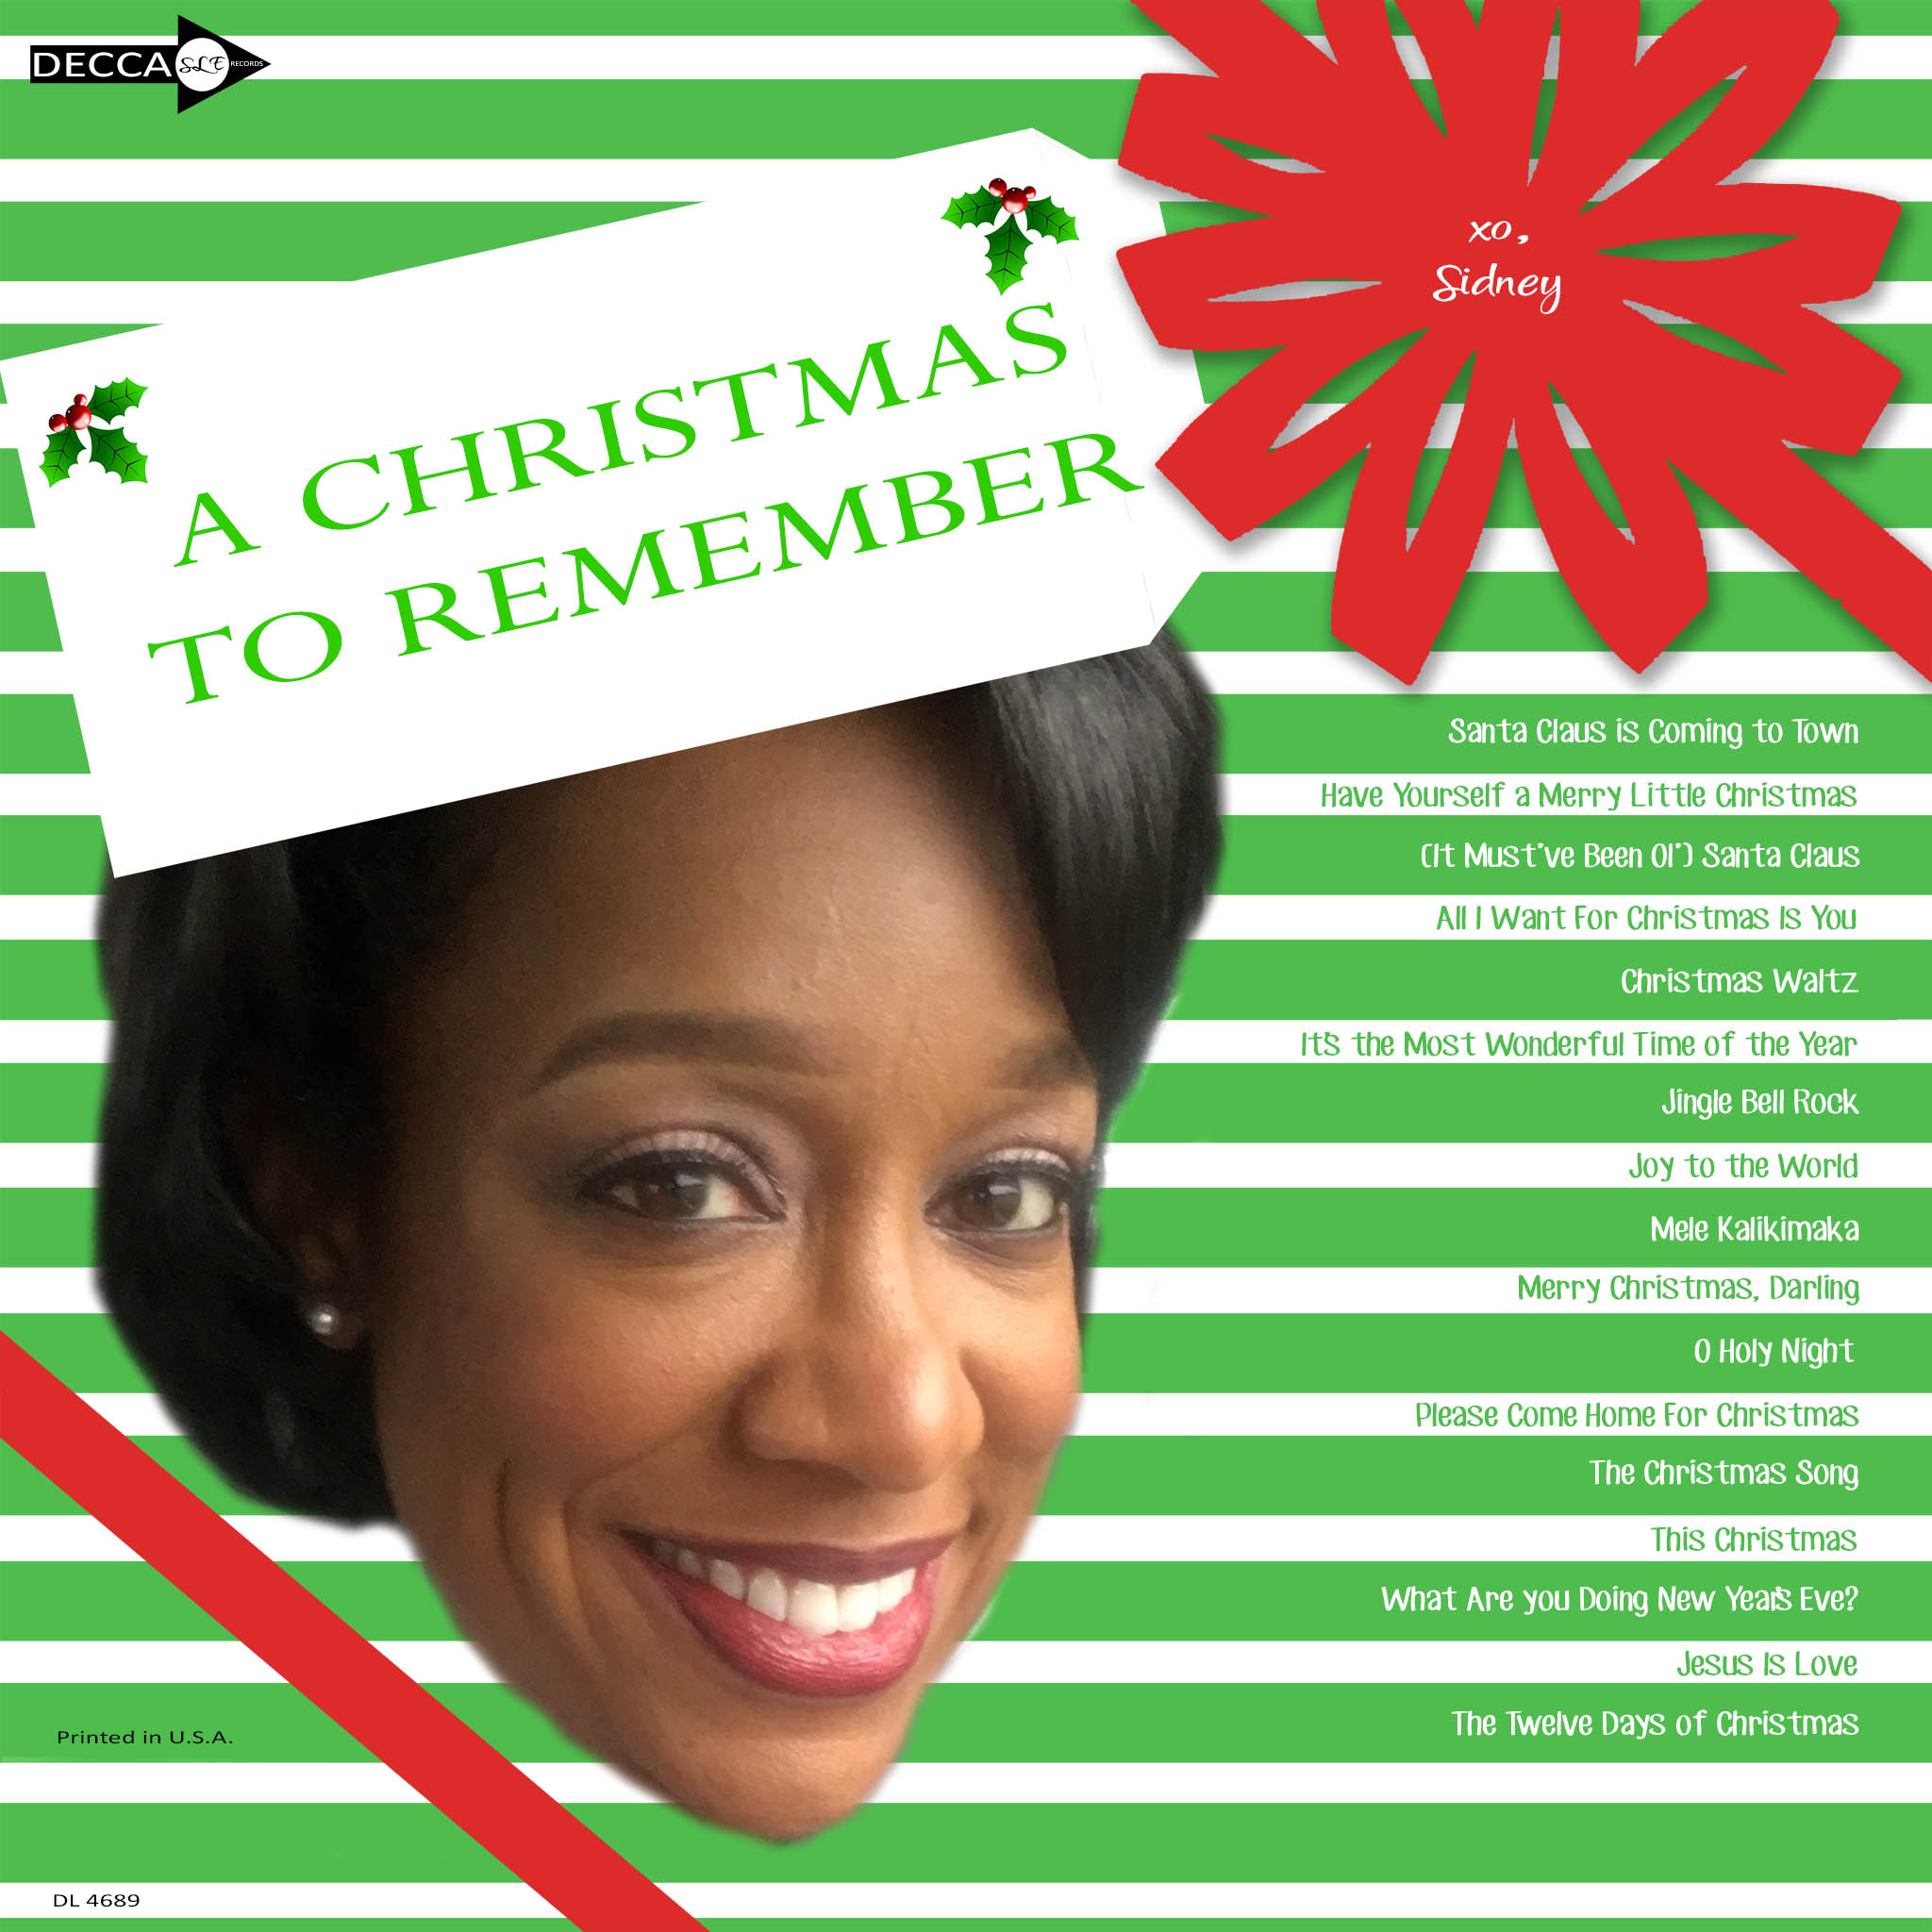 A Christmas to Remember - Track 14 - This Christmas